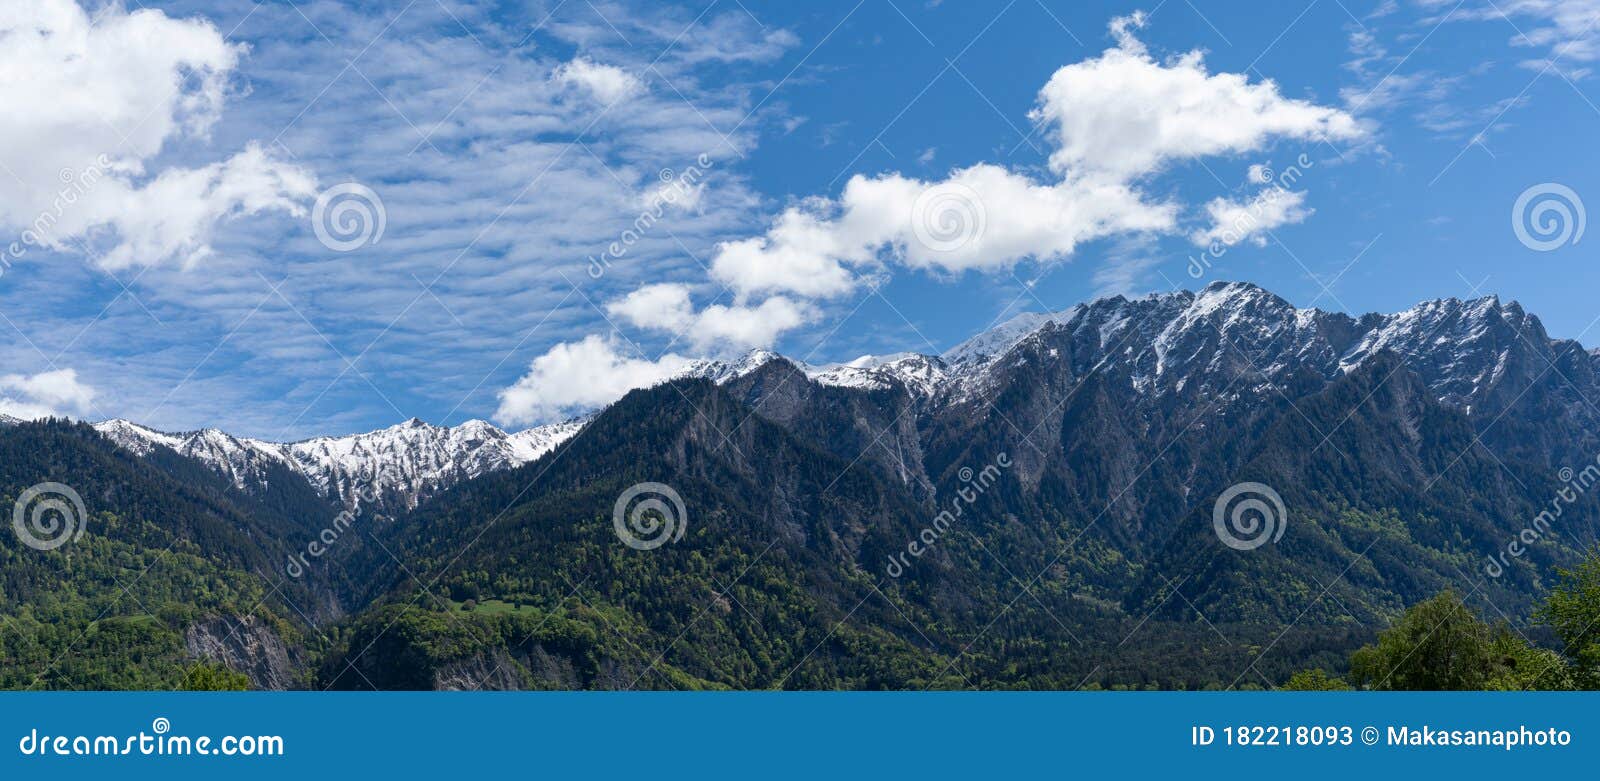 Mountain Landscape With Jagged Snow Covered Peaks And Green Forest